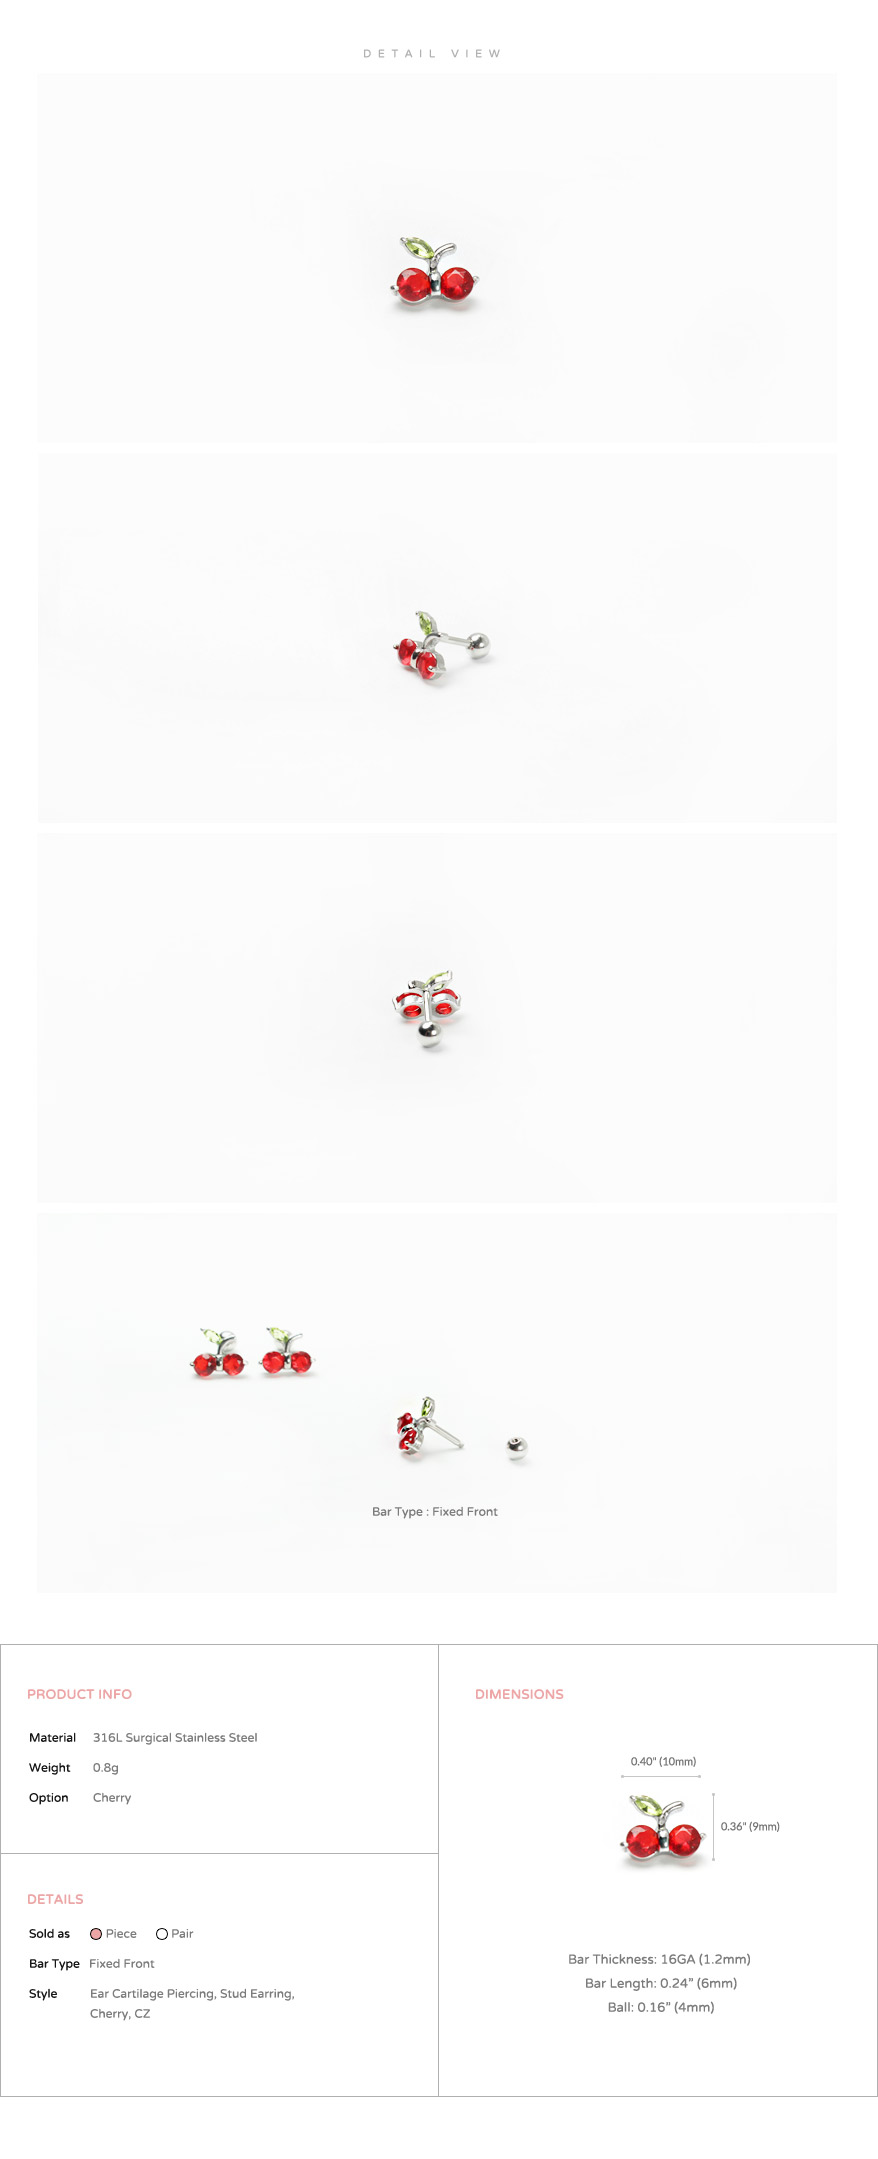 ear_studs_piercing_Cartilage_16g_316l_Stainless_Steel_earring_tragus_korean_asian_style_barbell_cherry_gem_cubic_cz_2